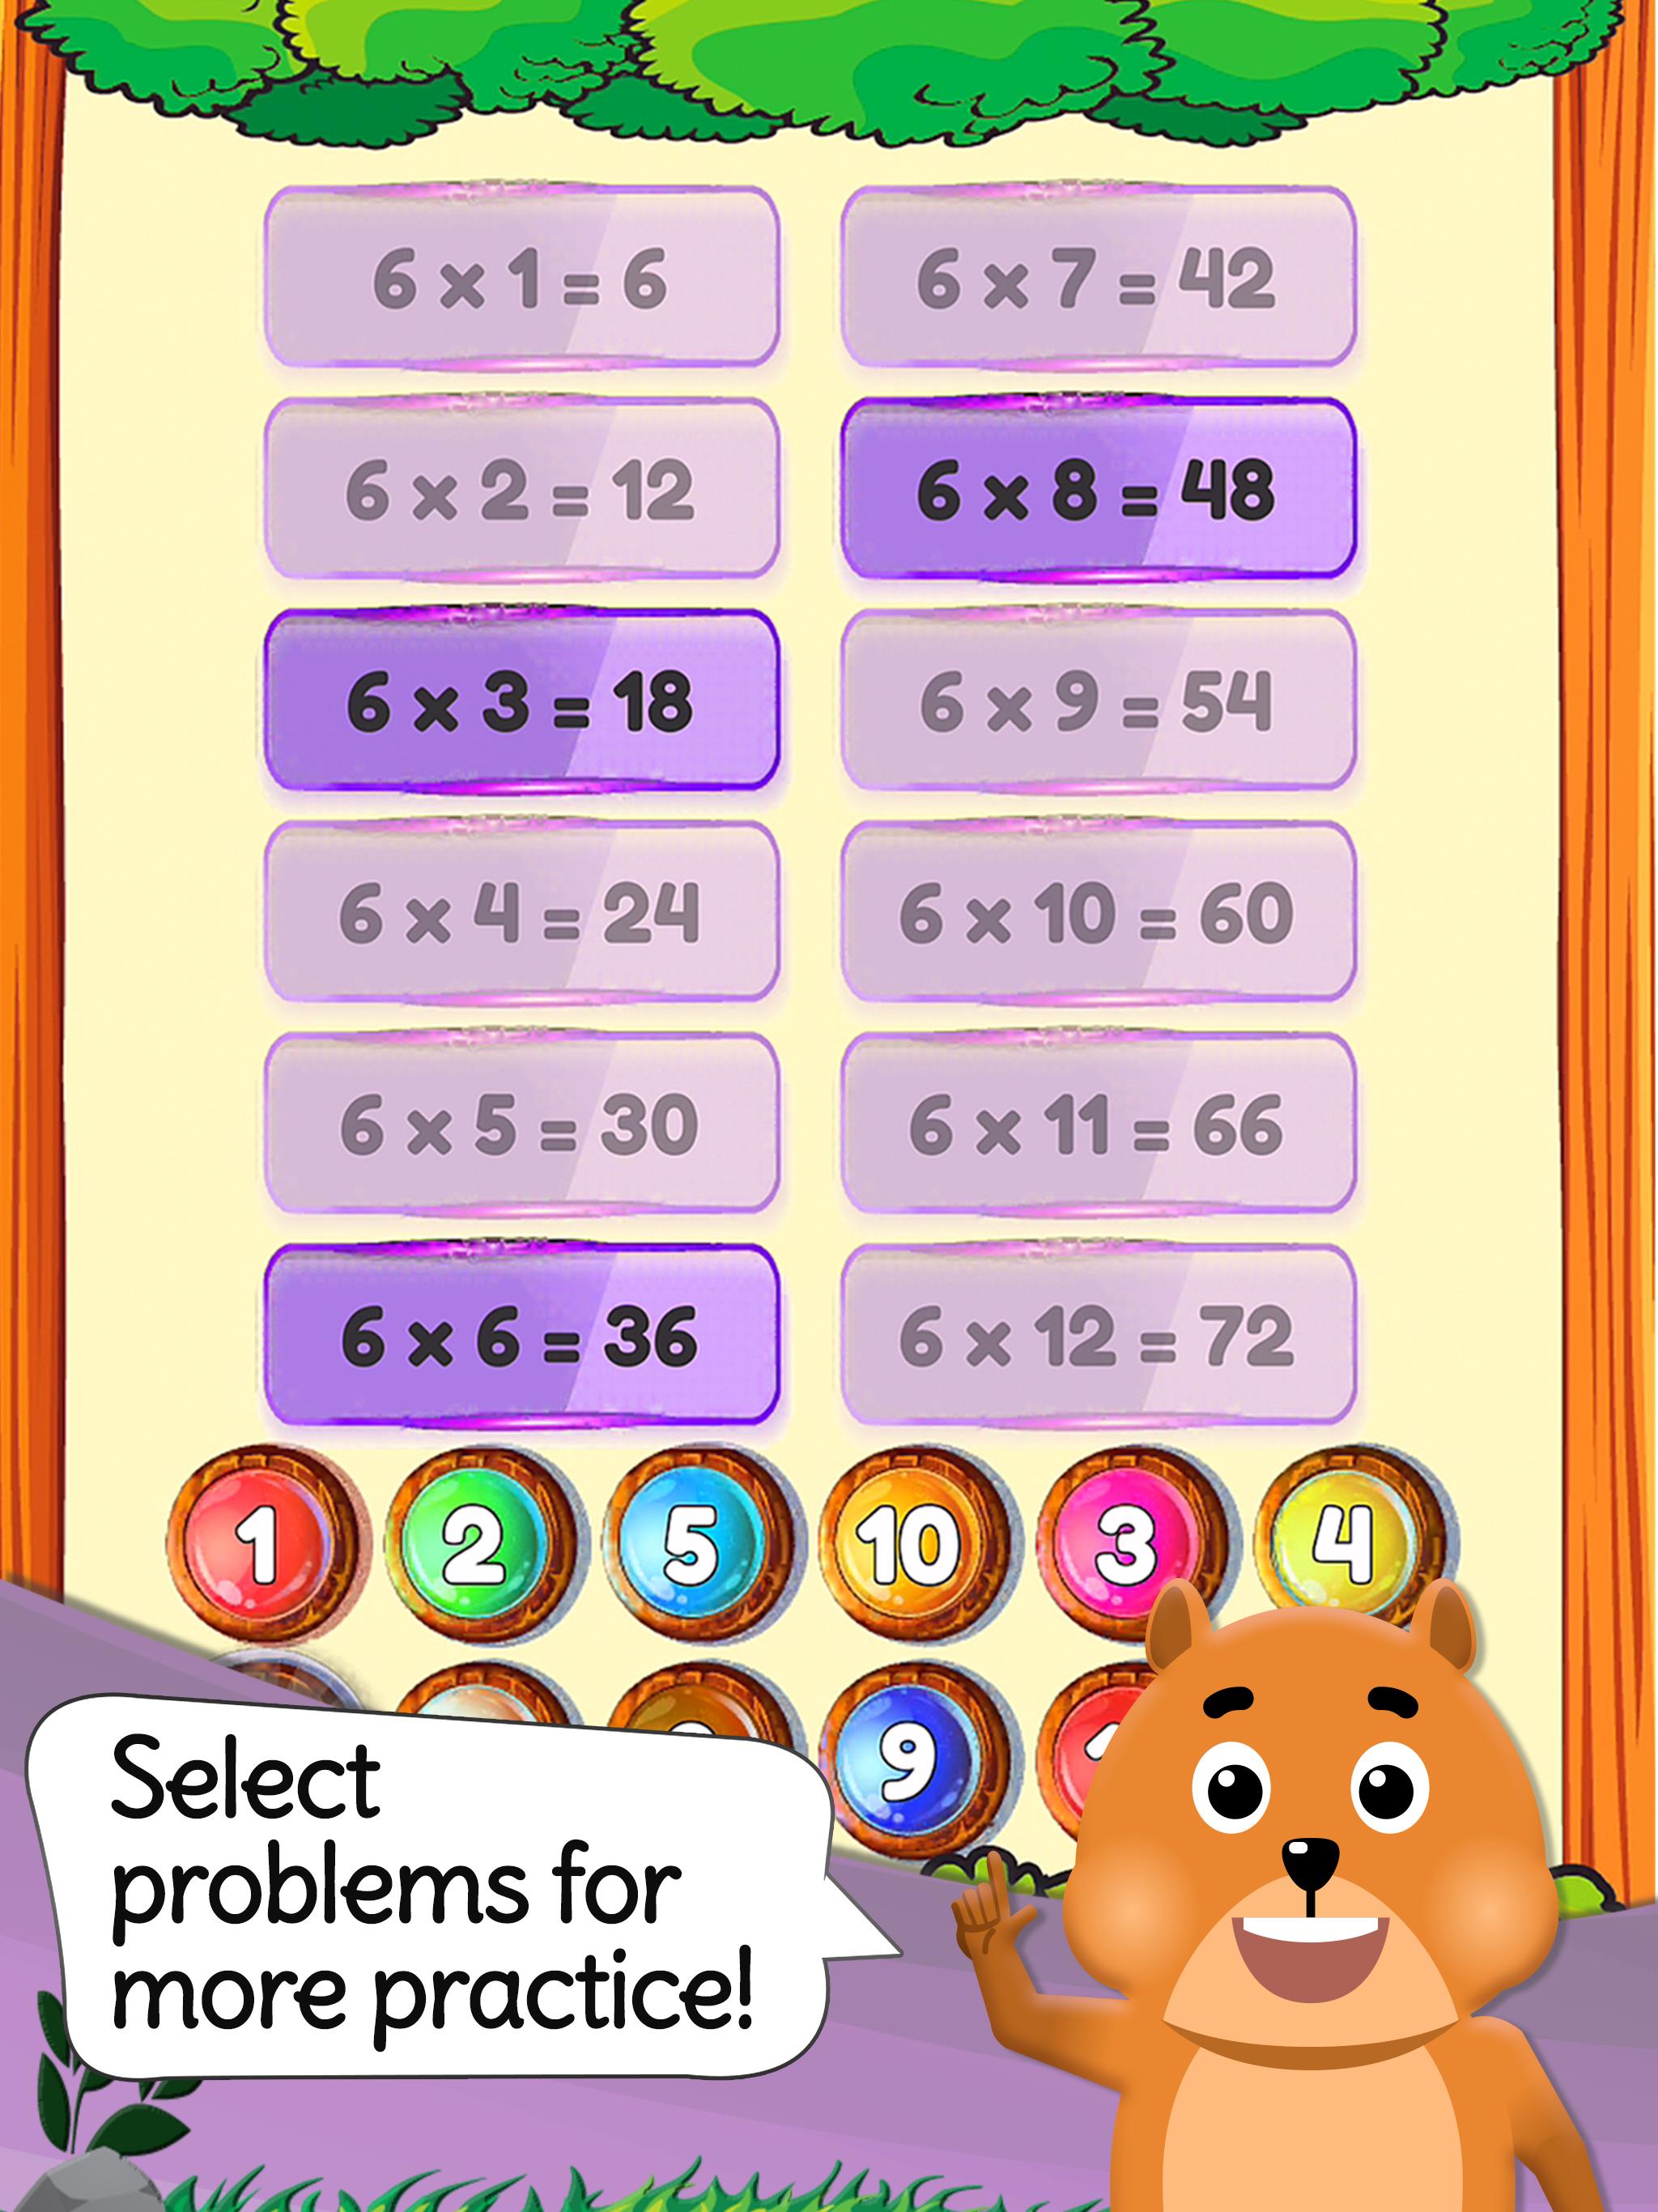 Times Tables & Friends: Free Multiplication Games 2.3.77 Screenshot 23